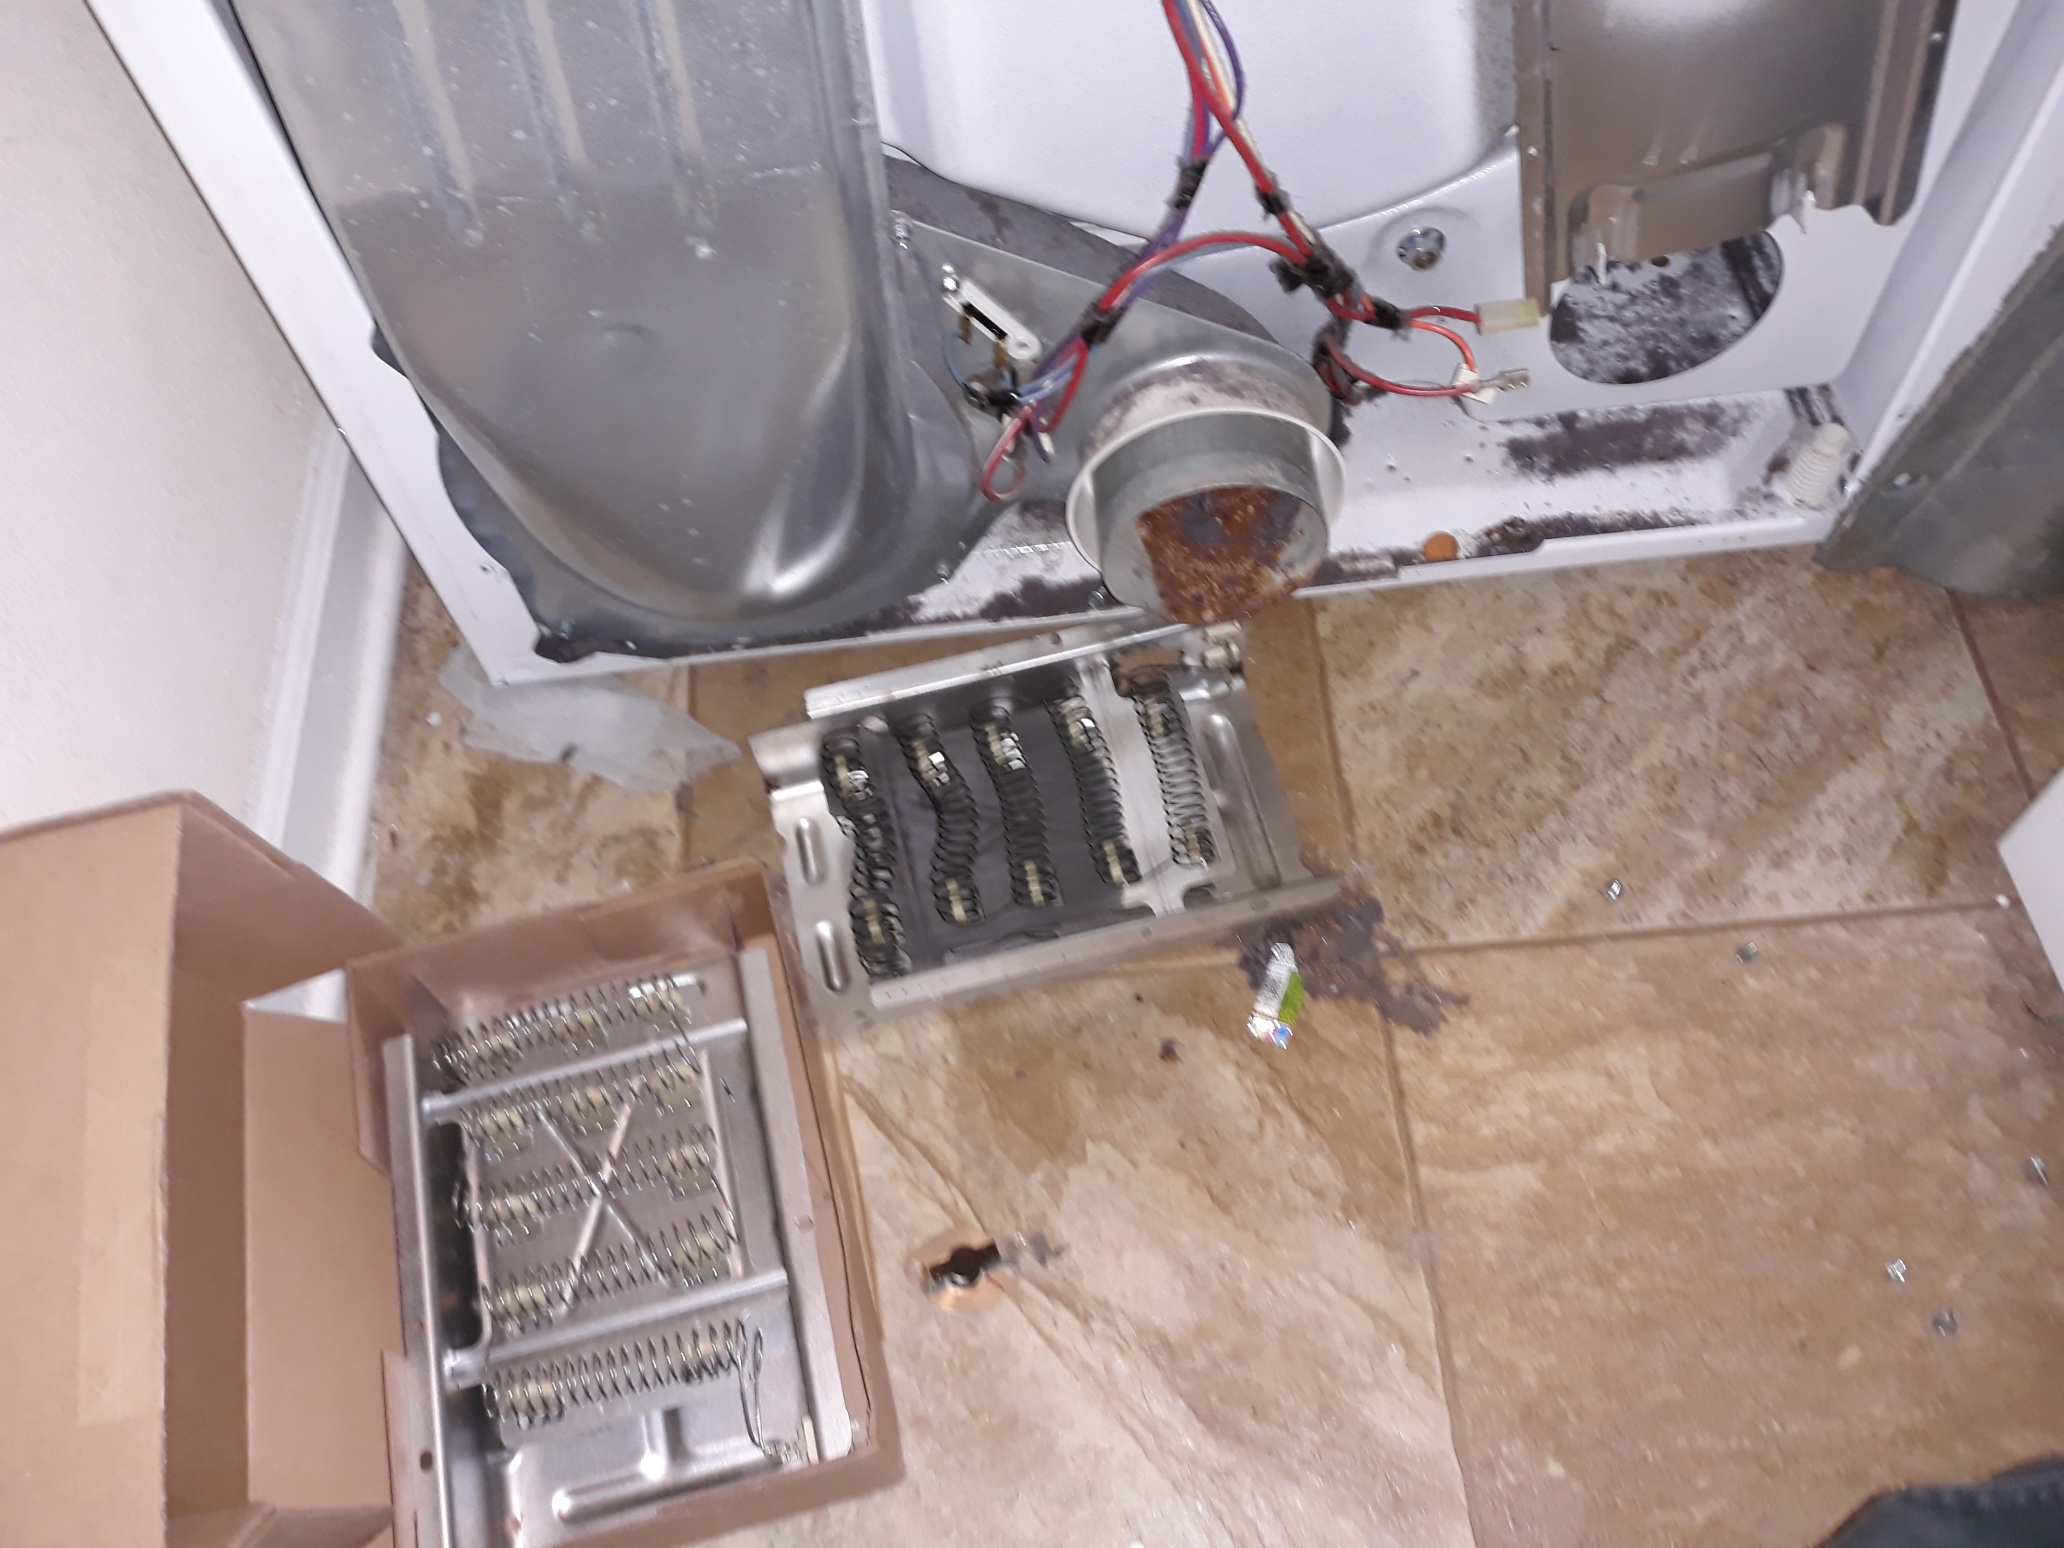 appliance repair dryer repair repaired by replacement of the broken heating element with a new part. walnut ave okahumpka fl 34762